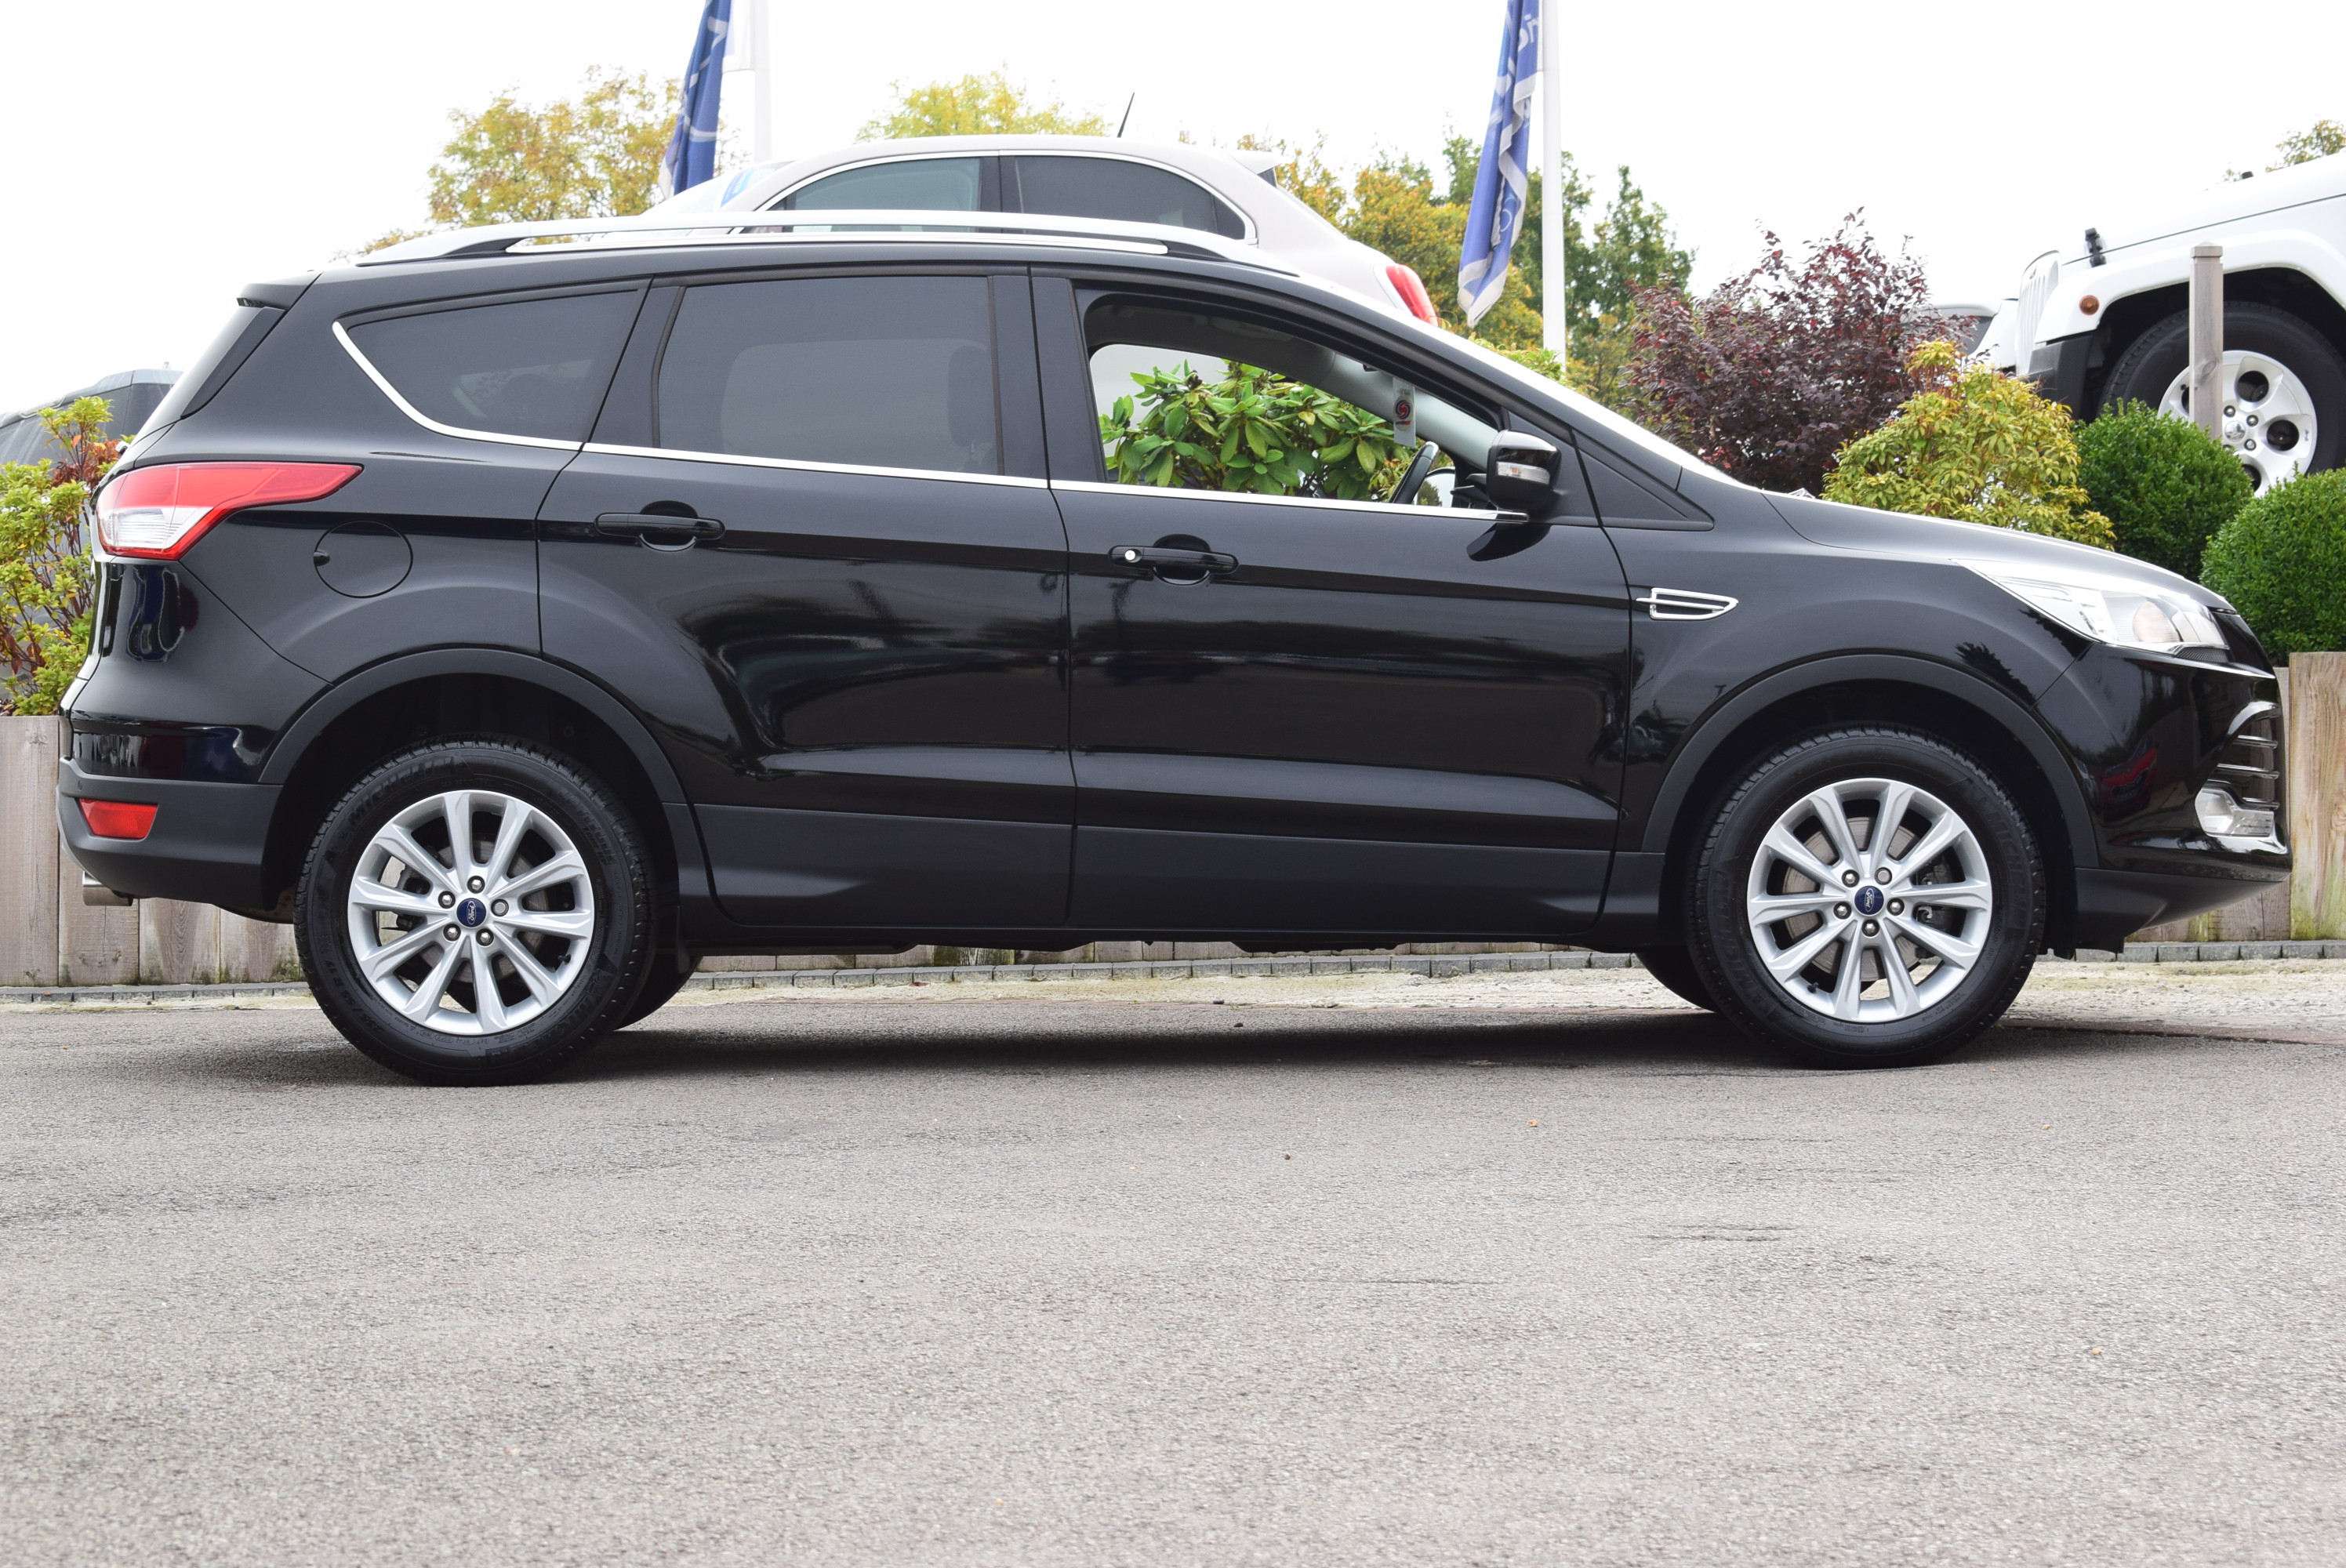 FORD KUGA 2.0 TDCi 150 Titanium 5dr 2WD For Sale